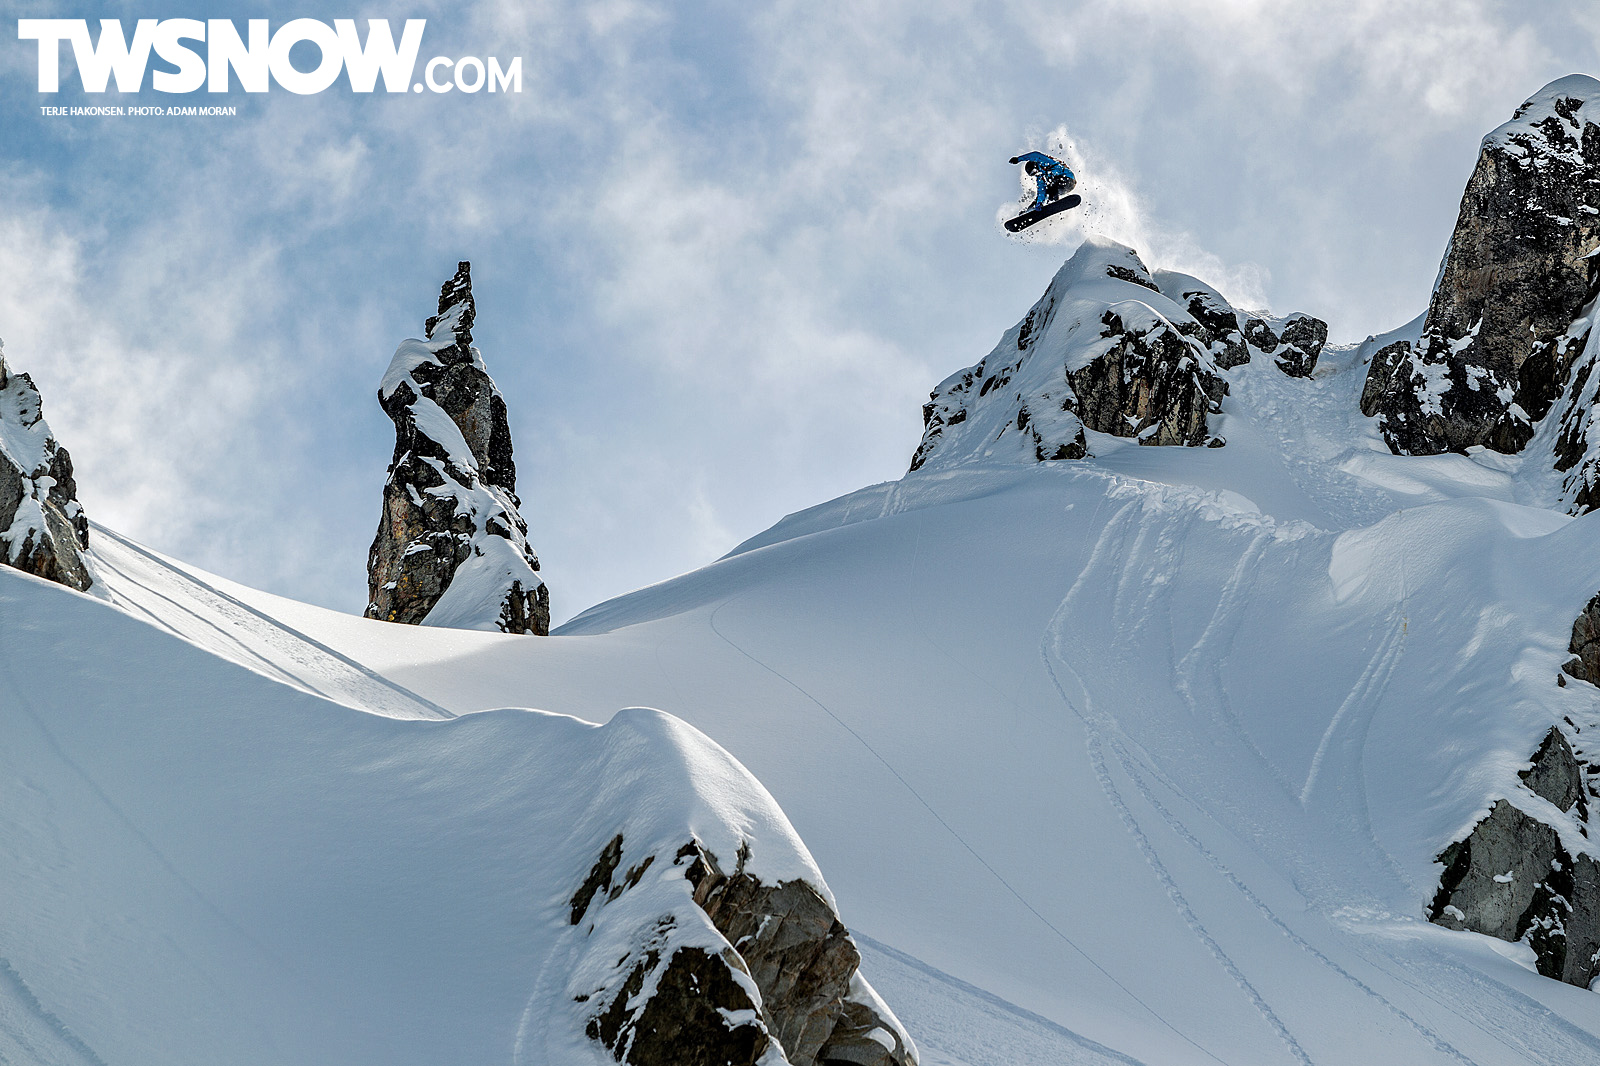 Wallpaper Wednesday Backcountry Air Time Transworld Snowboarding